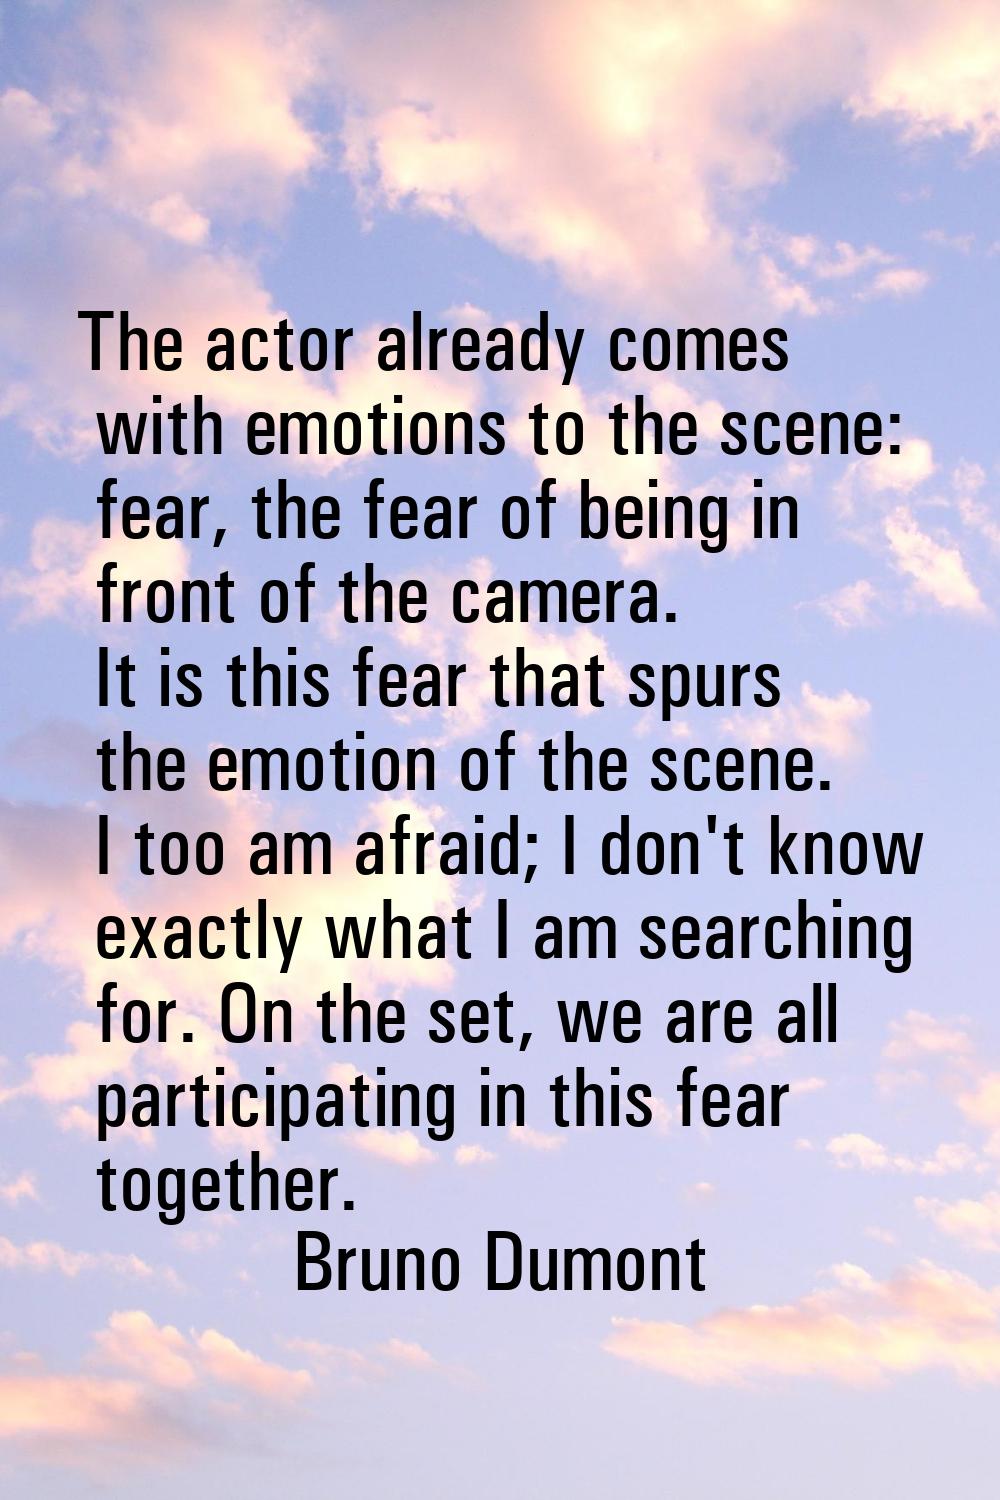 The actor already comes with emotions to the scene: fear, the fear of being in front of the camera.